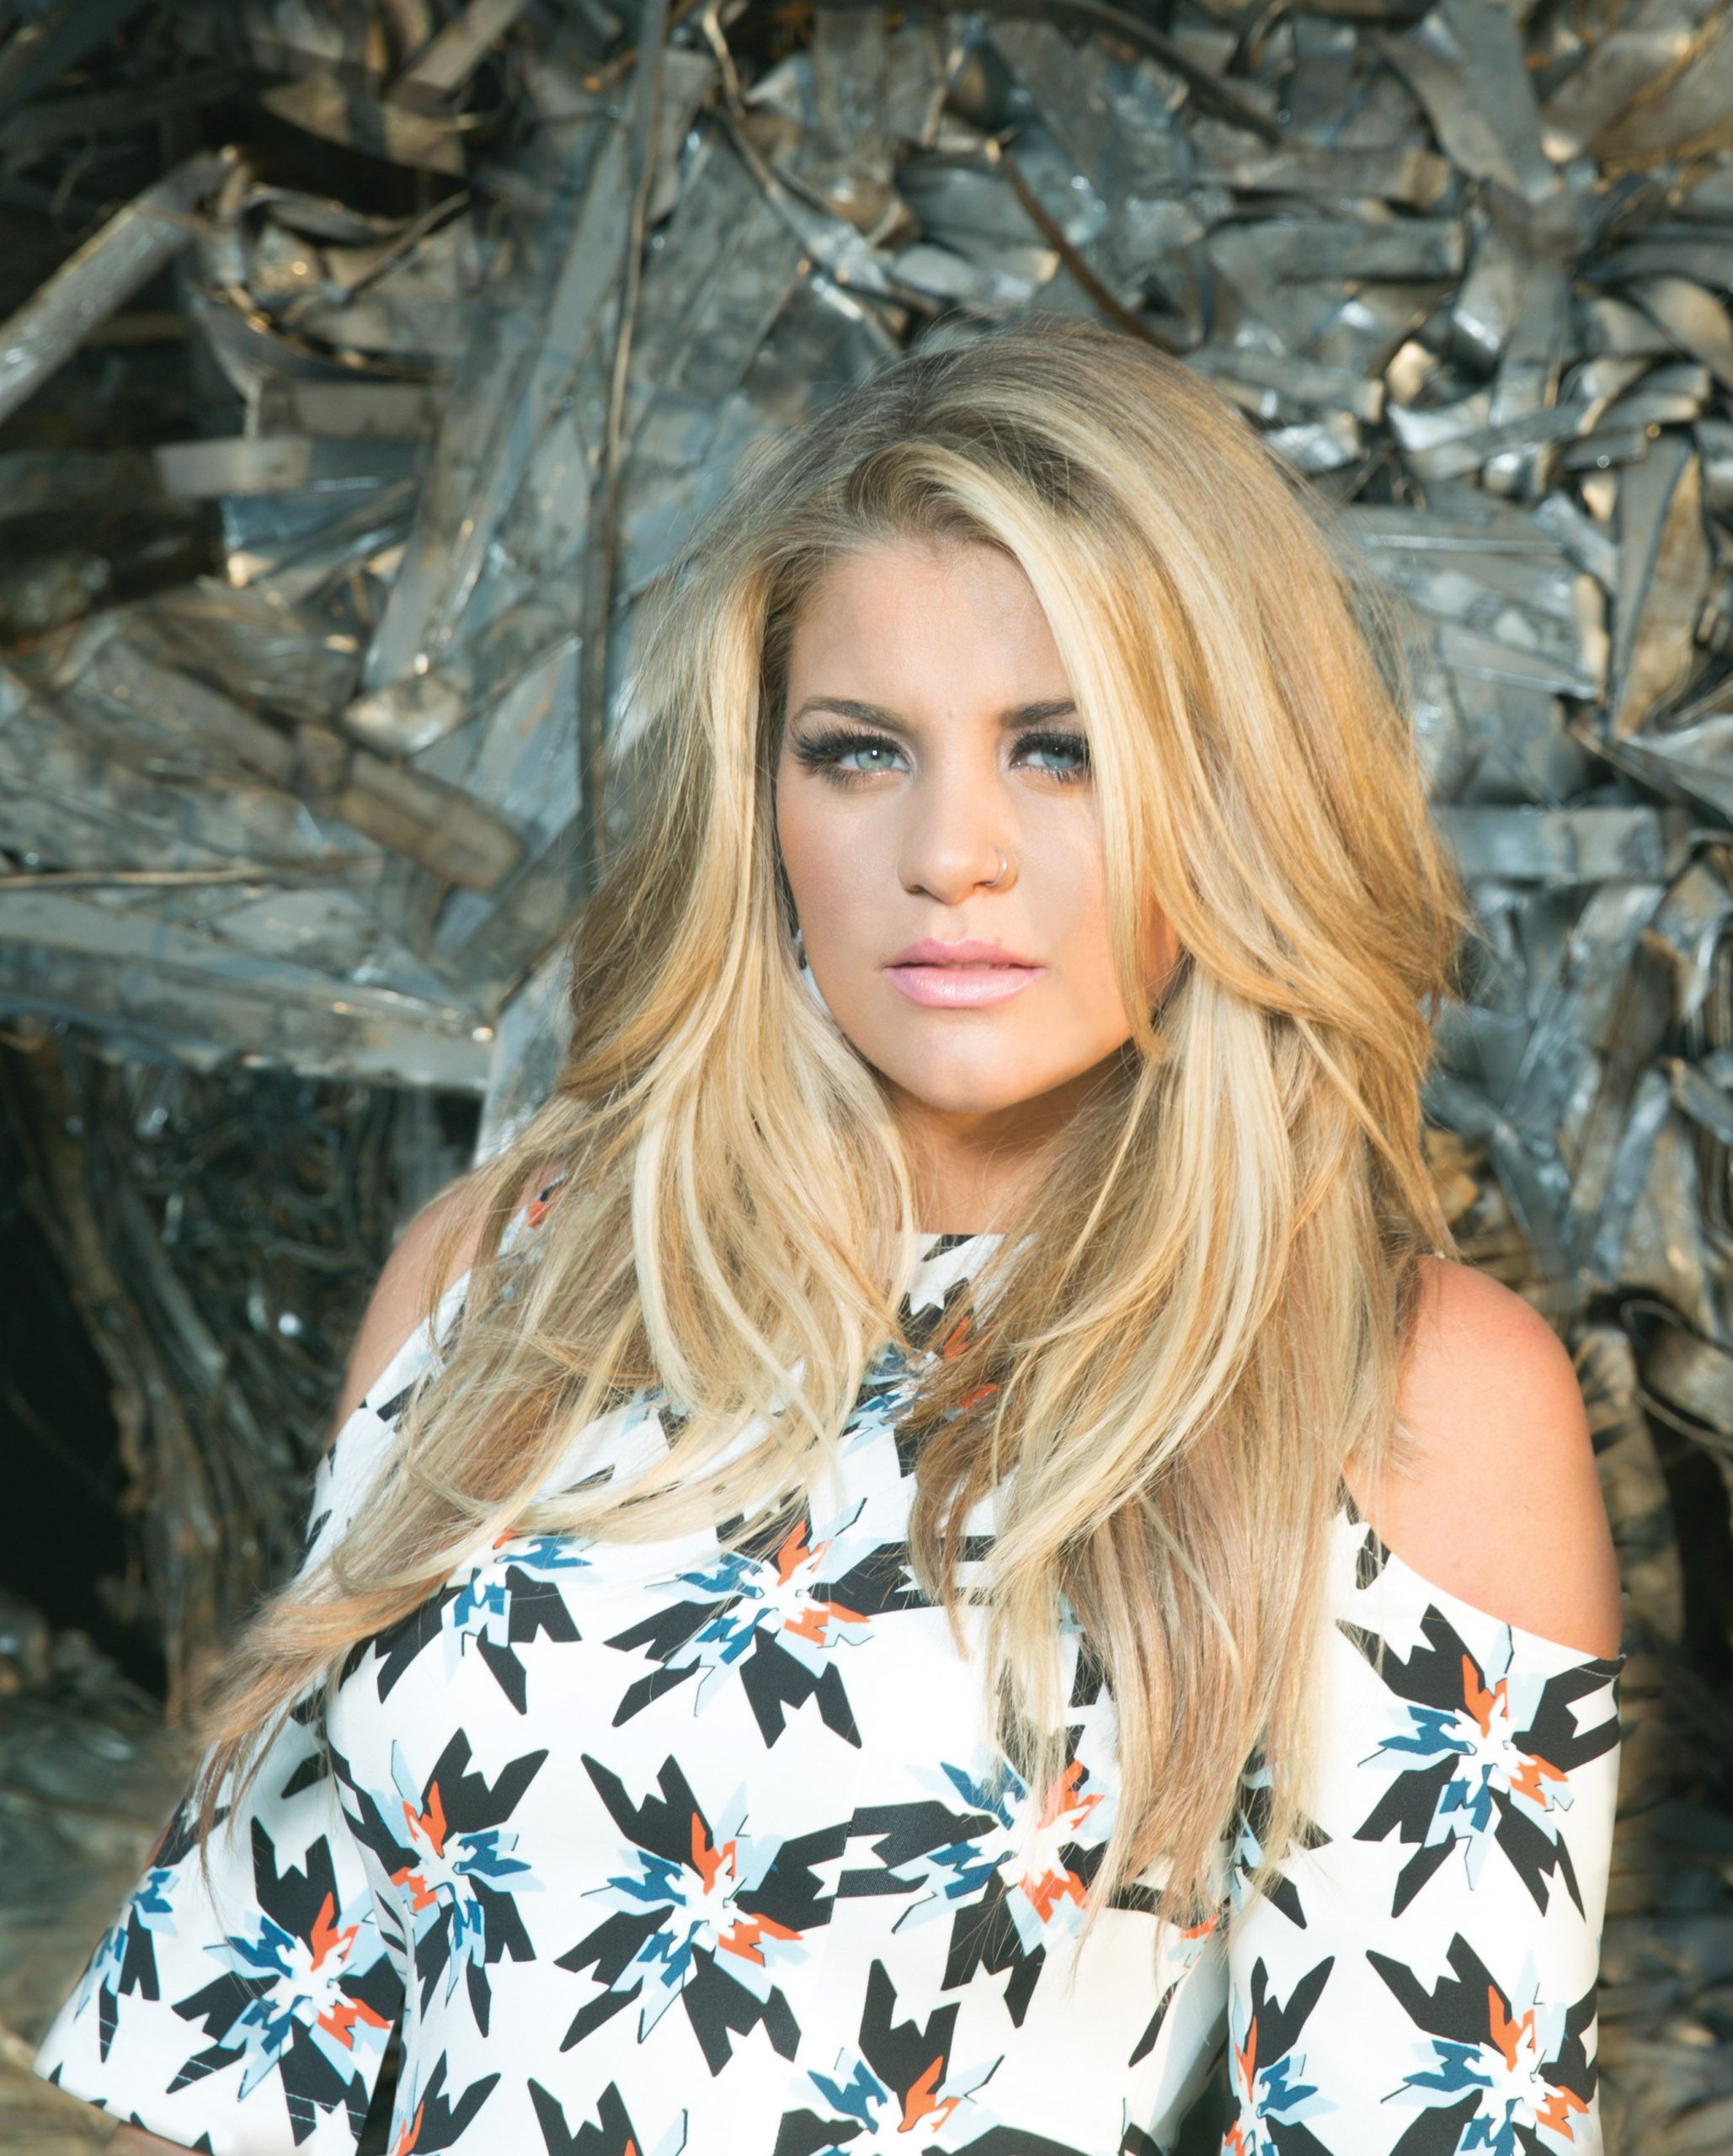 LAUREN ALAINA TO RELEASE SELF-TITLED EP OCTOBER 2